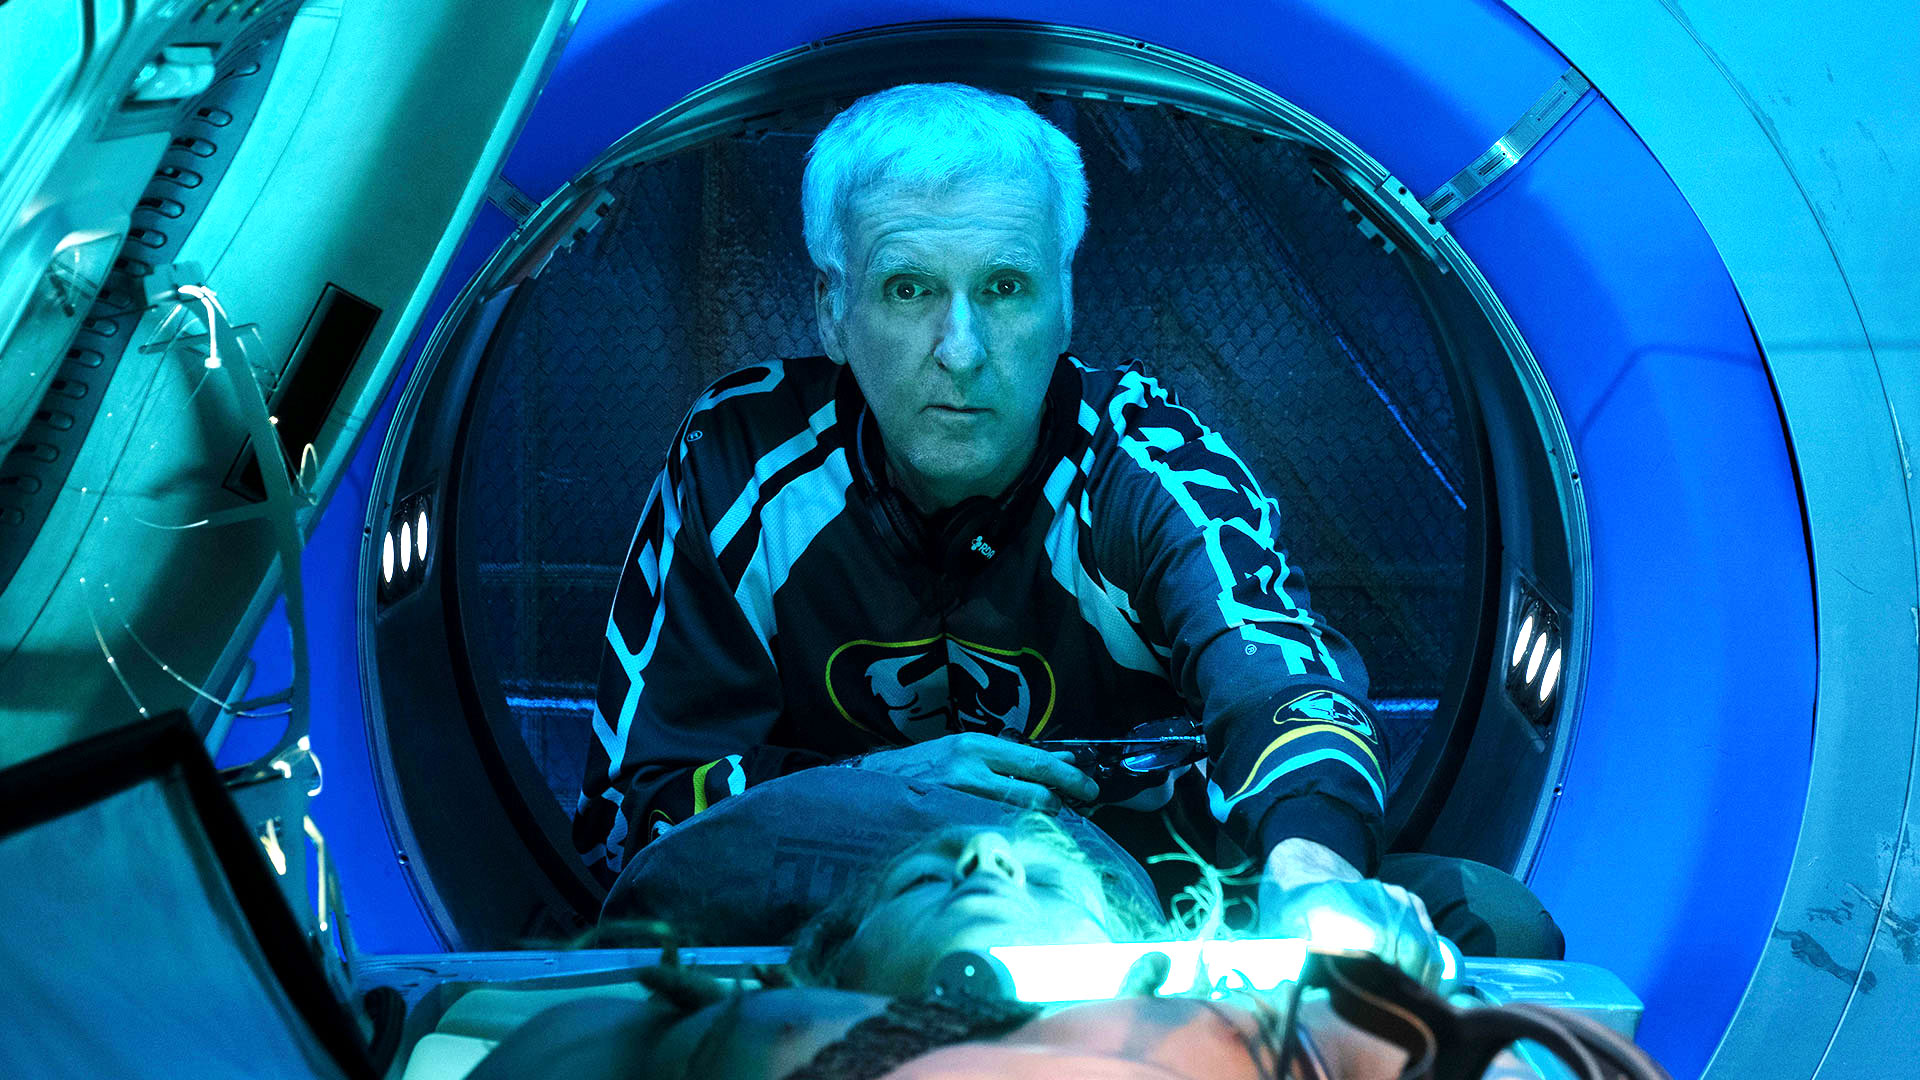 James cameron tells you if its okay to have a bathroom break during avatar the way of water